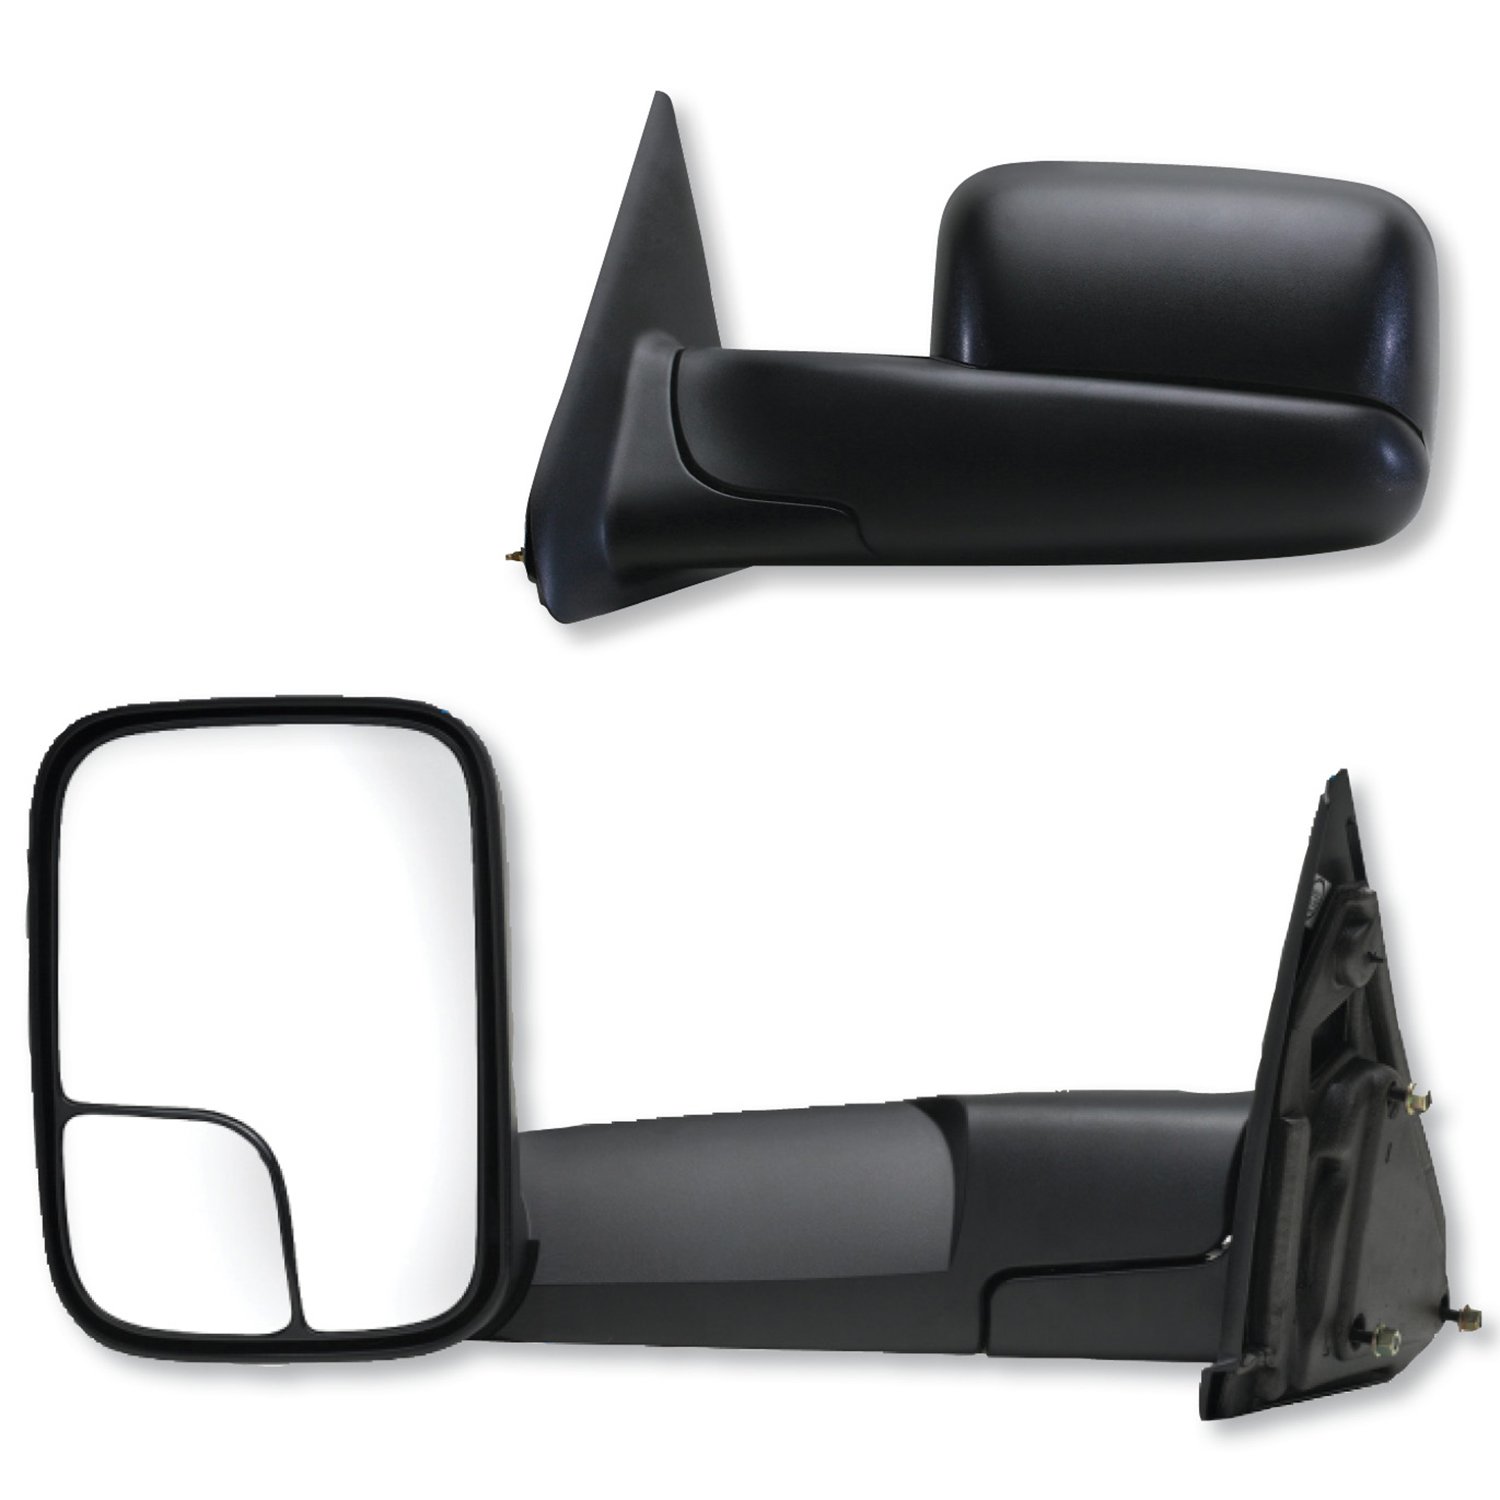 Fit System 60111-12C Towing Mirror Pair for Dodge Ram Pick-Up 1500, 2500/3500, Textured Black, spot Mirror, flip-Out Head, Foldaway Manual von Fit System